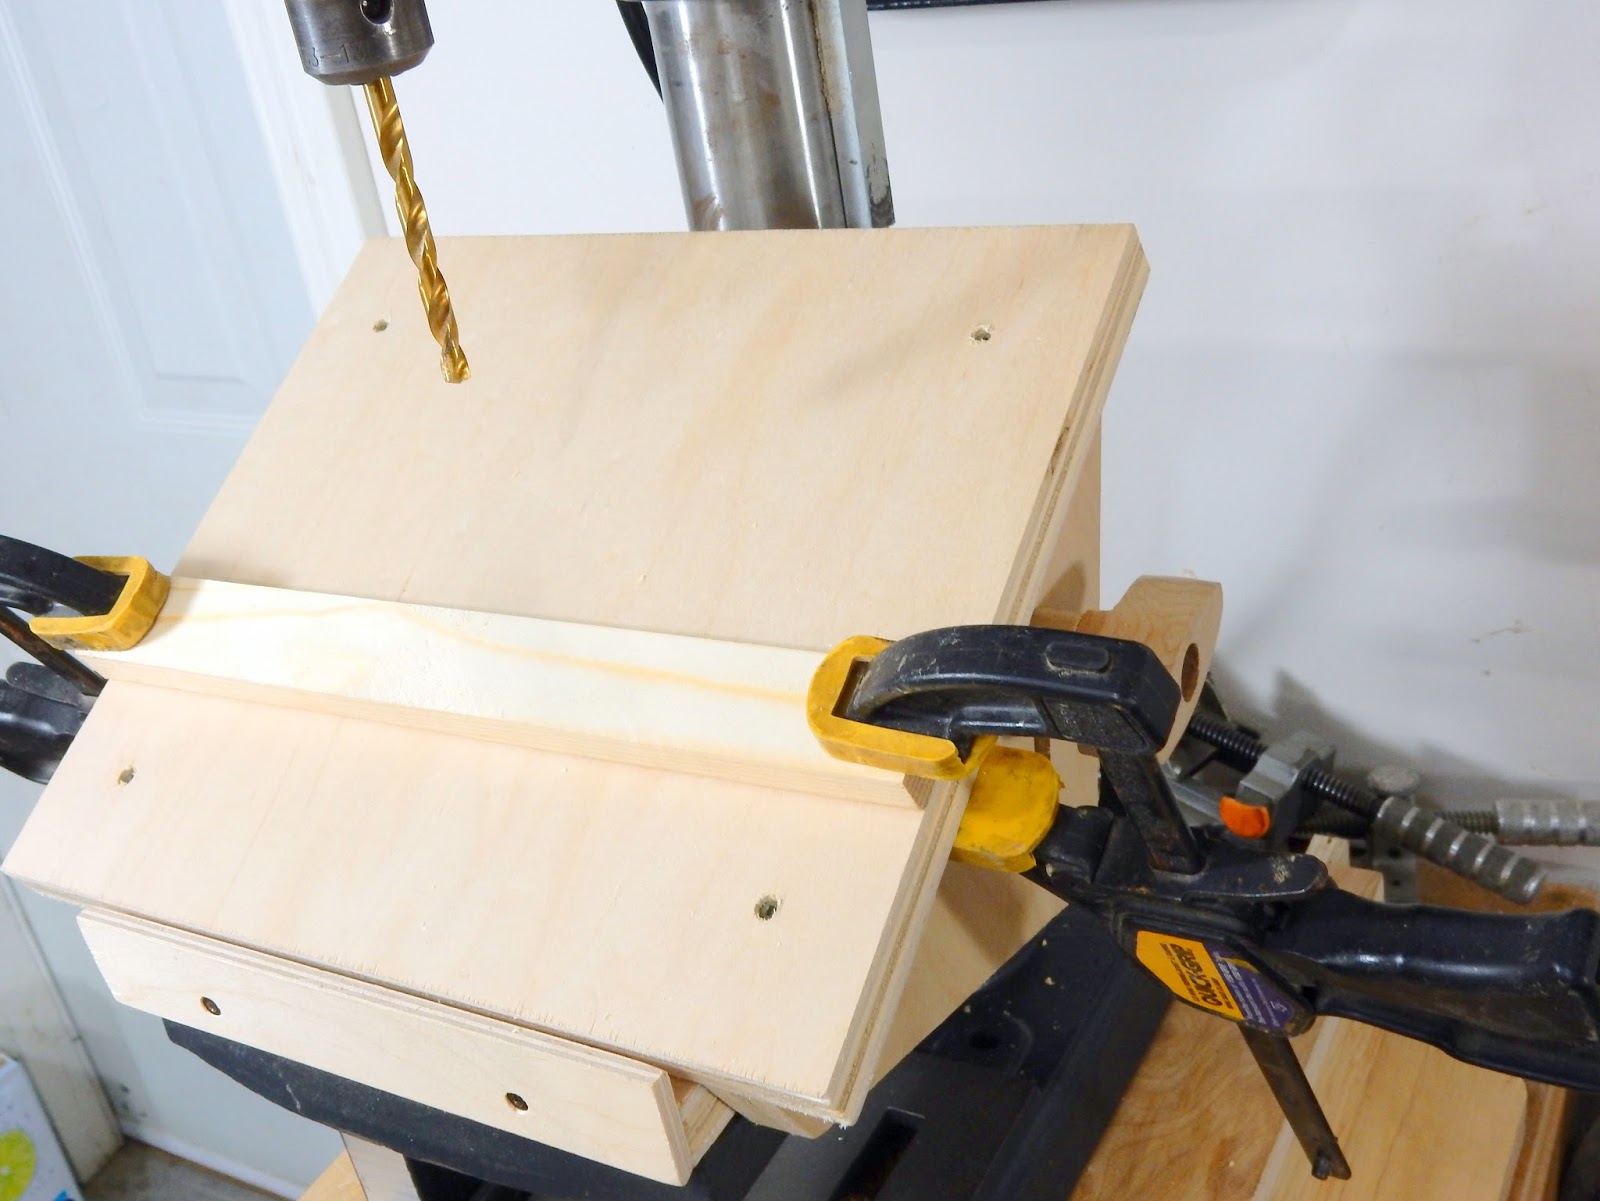 Jax Design: How to Make an Angle Drilling Jig